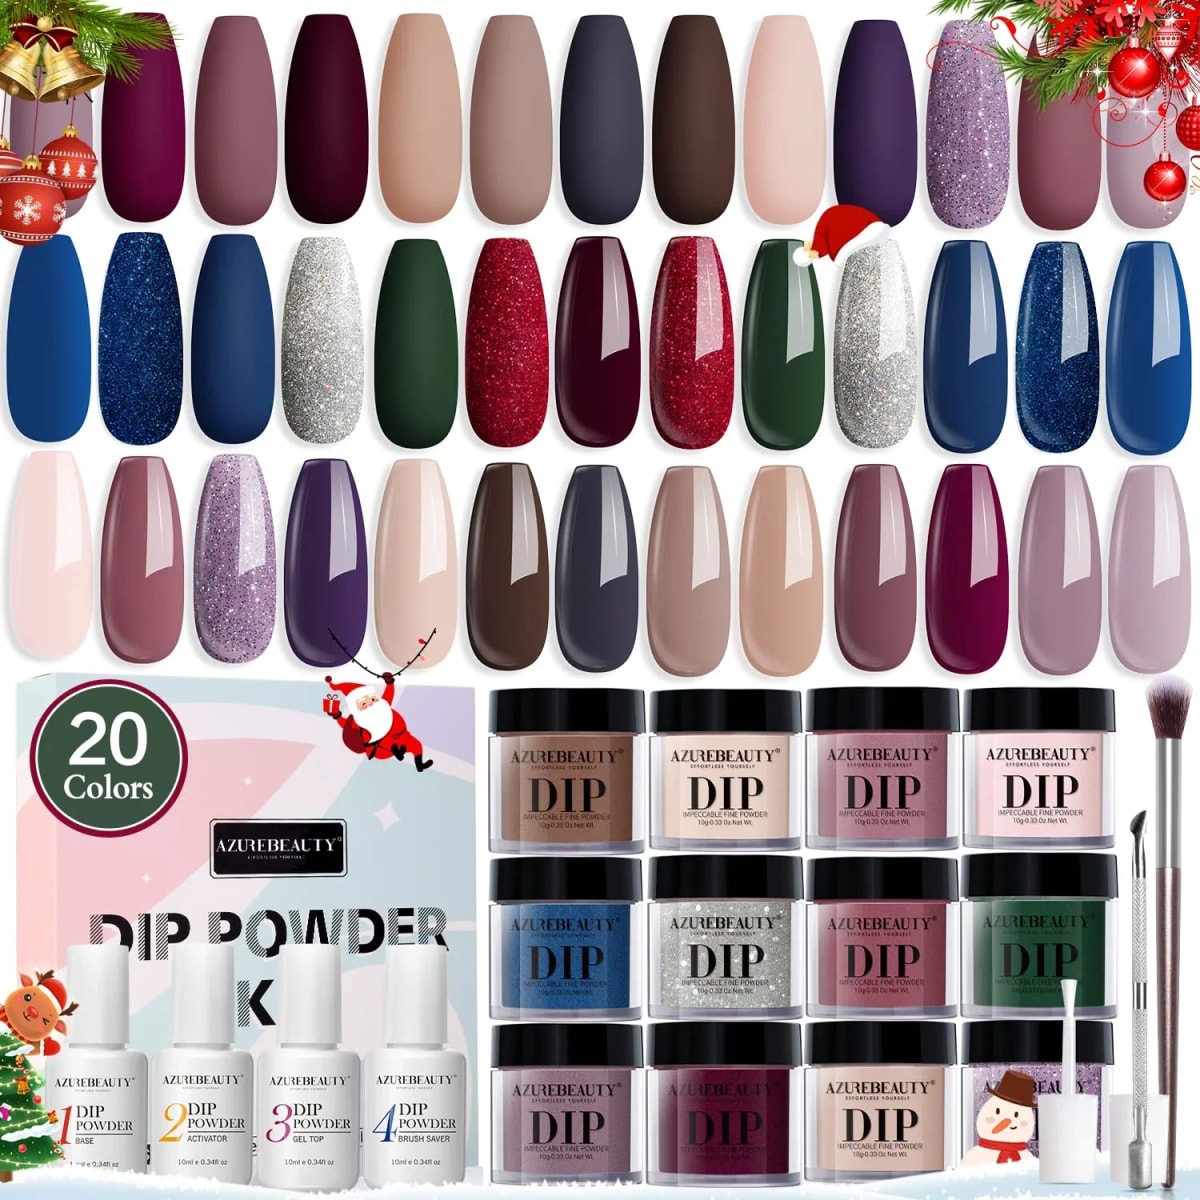 Dip Powder Nail Kit Starter, Fall Winter 20 Colors Nude Brown Purple Blue Green Red Glitter Acrylic Dipping Powder System Liquid Set with Top/Base Coat for French Nail Art Manicure DIY Salon Women Christmas Gift